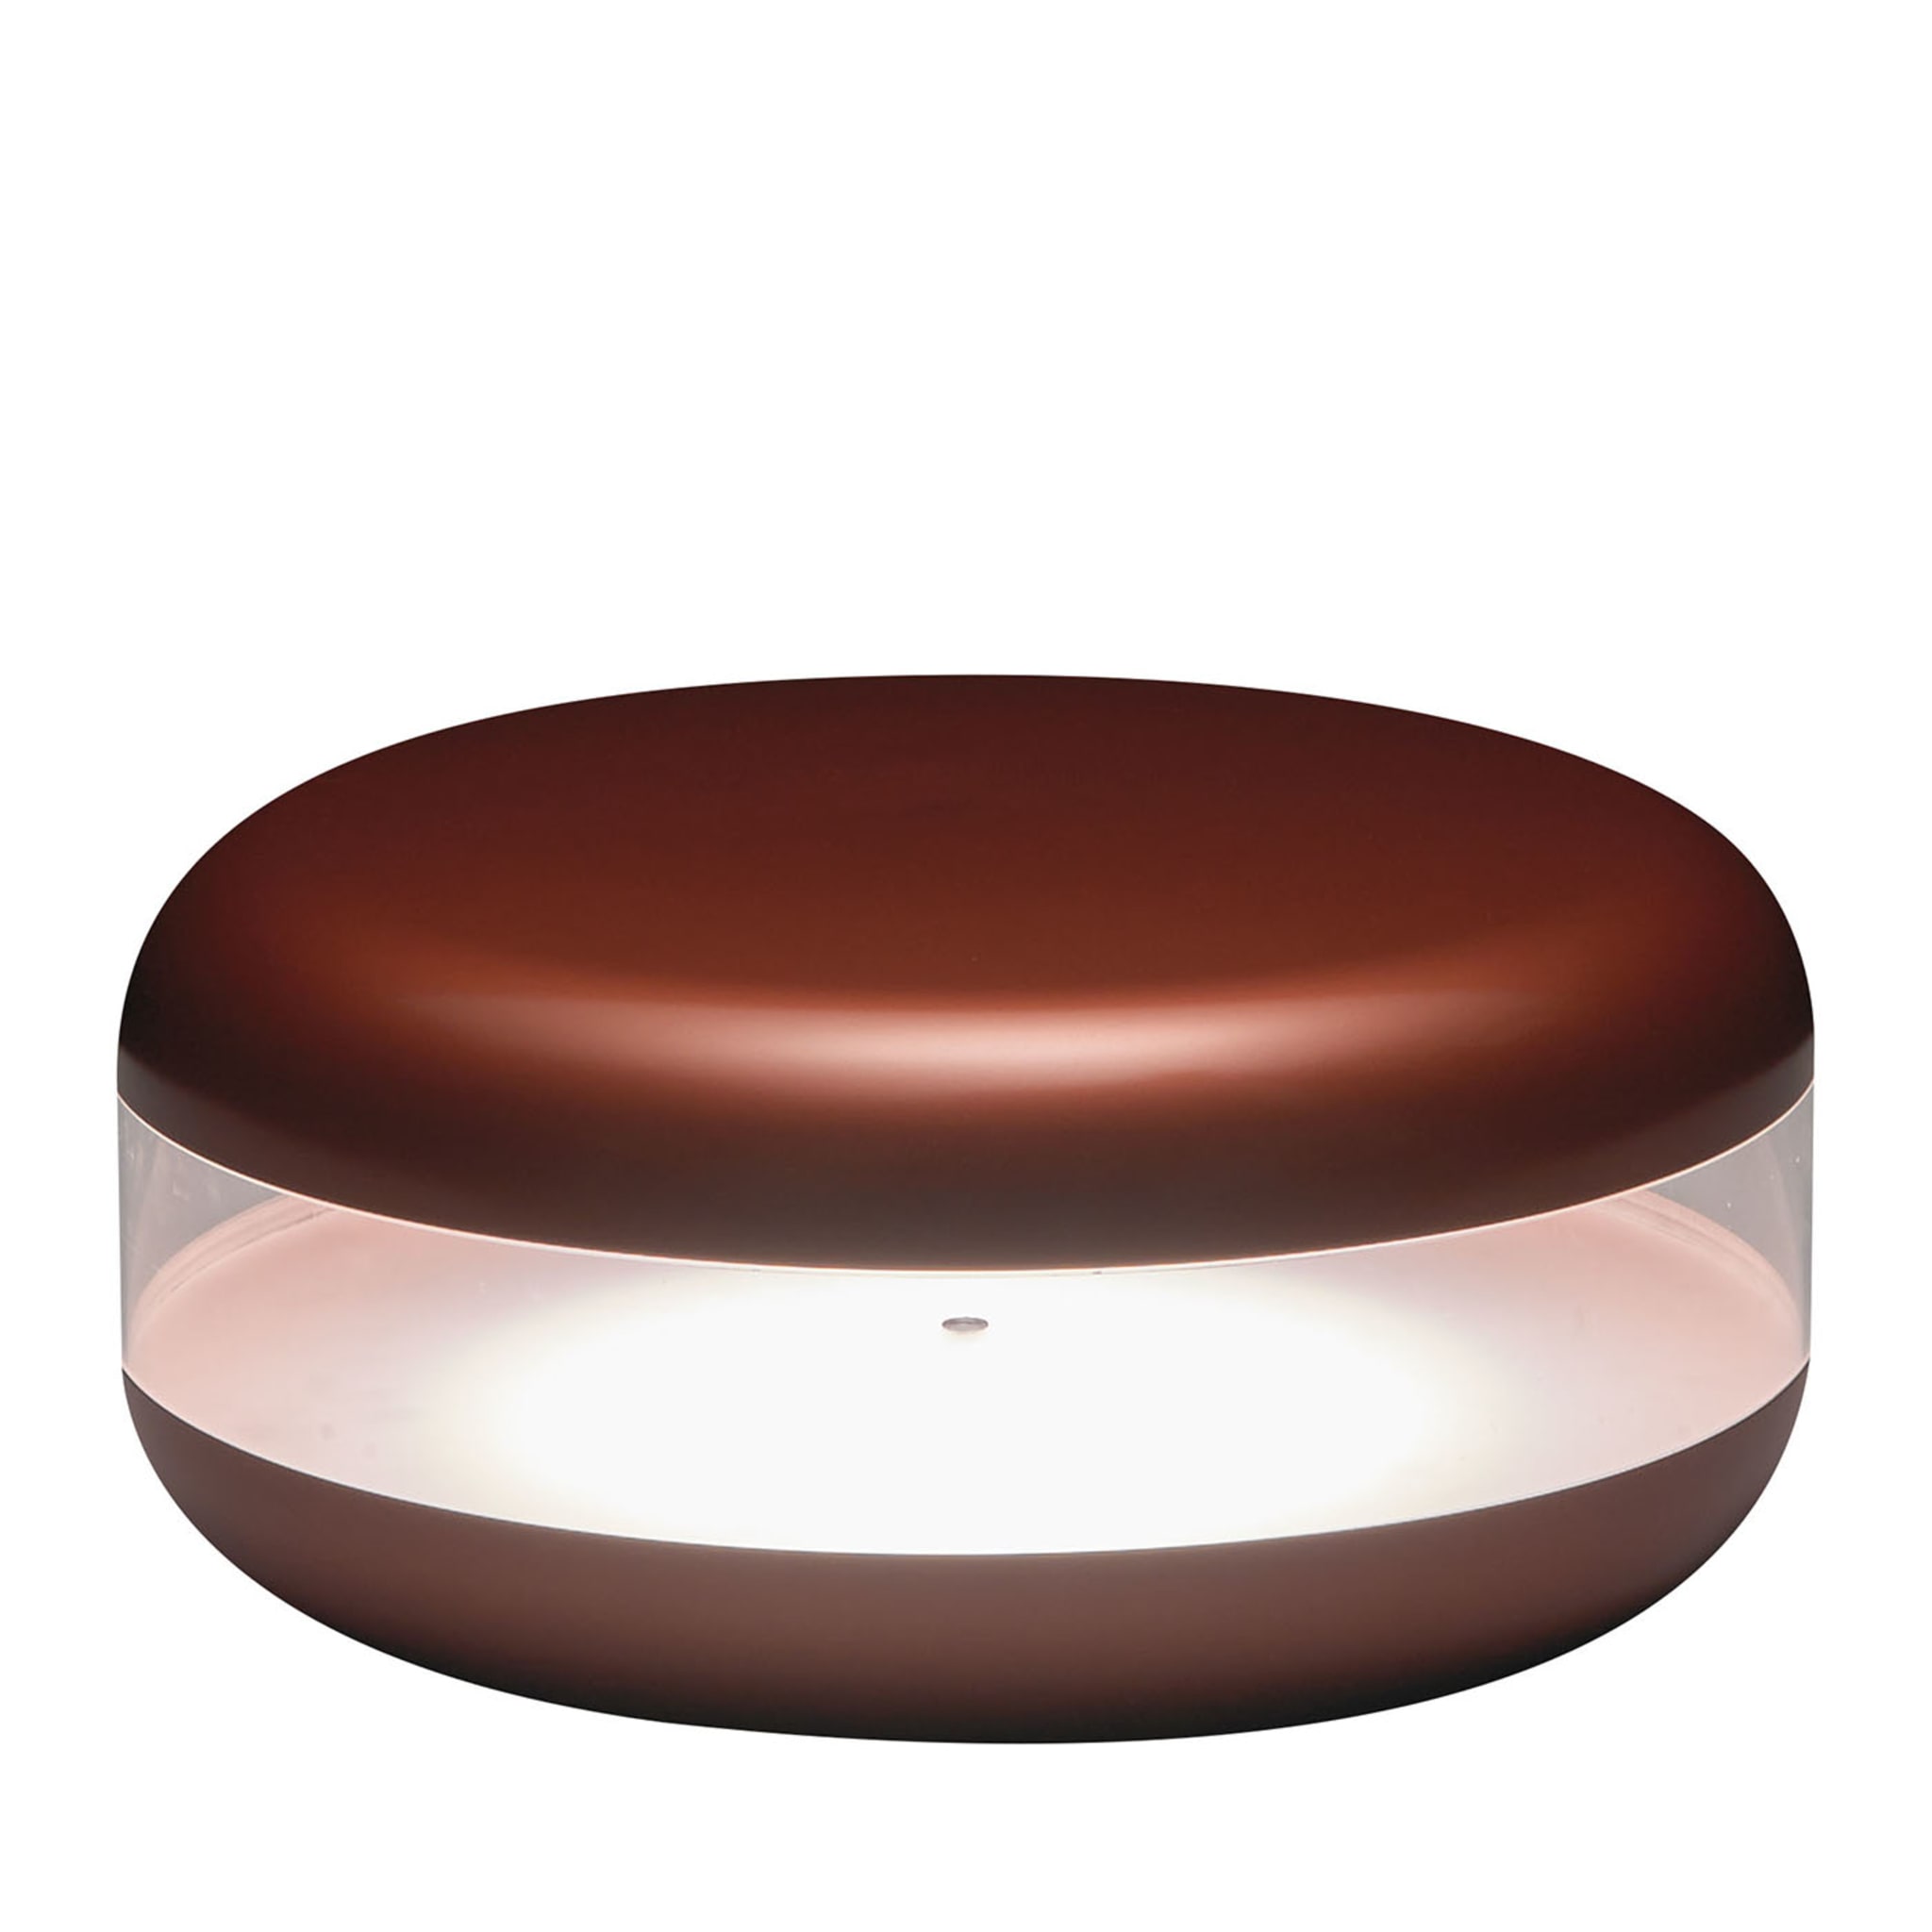 Macaron Red Table Lamp by Parisotto + Formenton - Main view